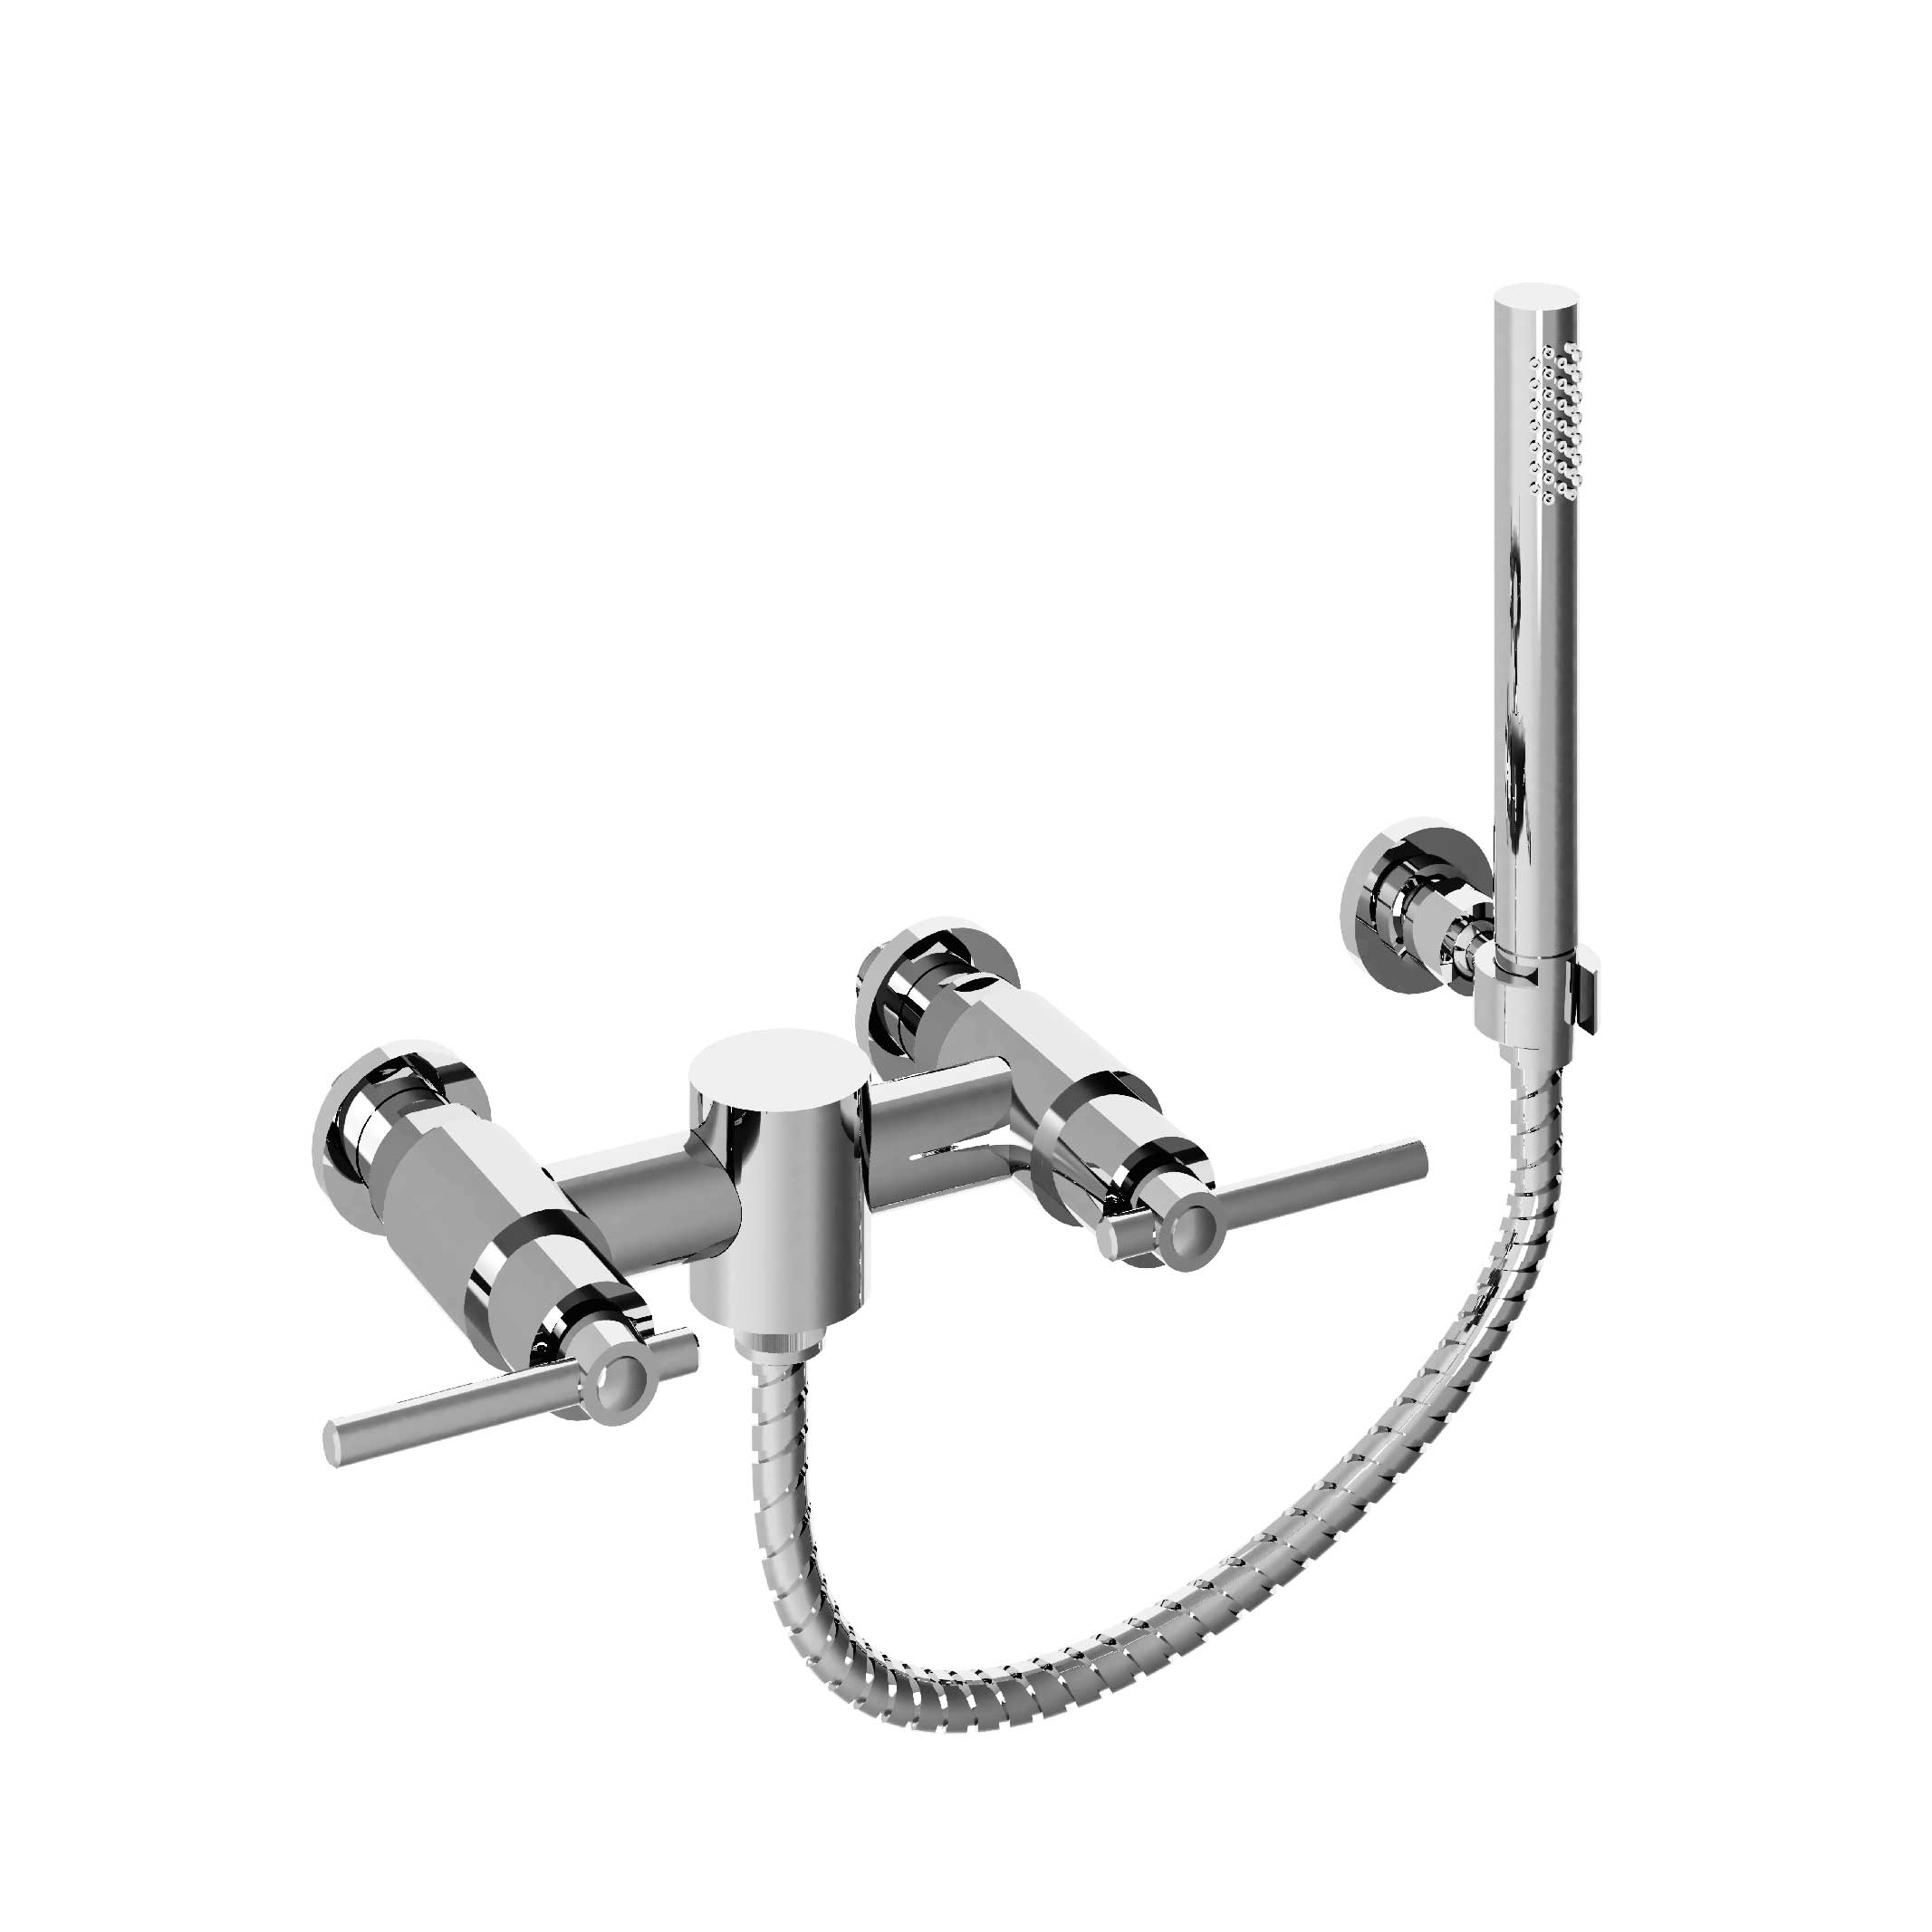 M91-2201 Shower mixer with hook